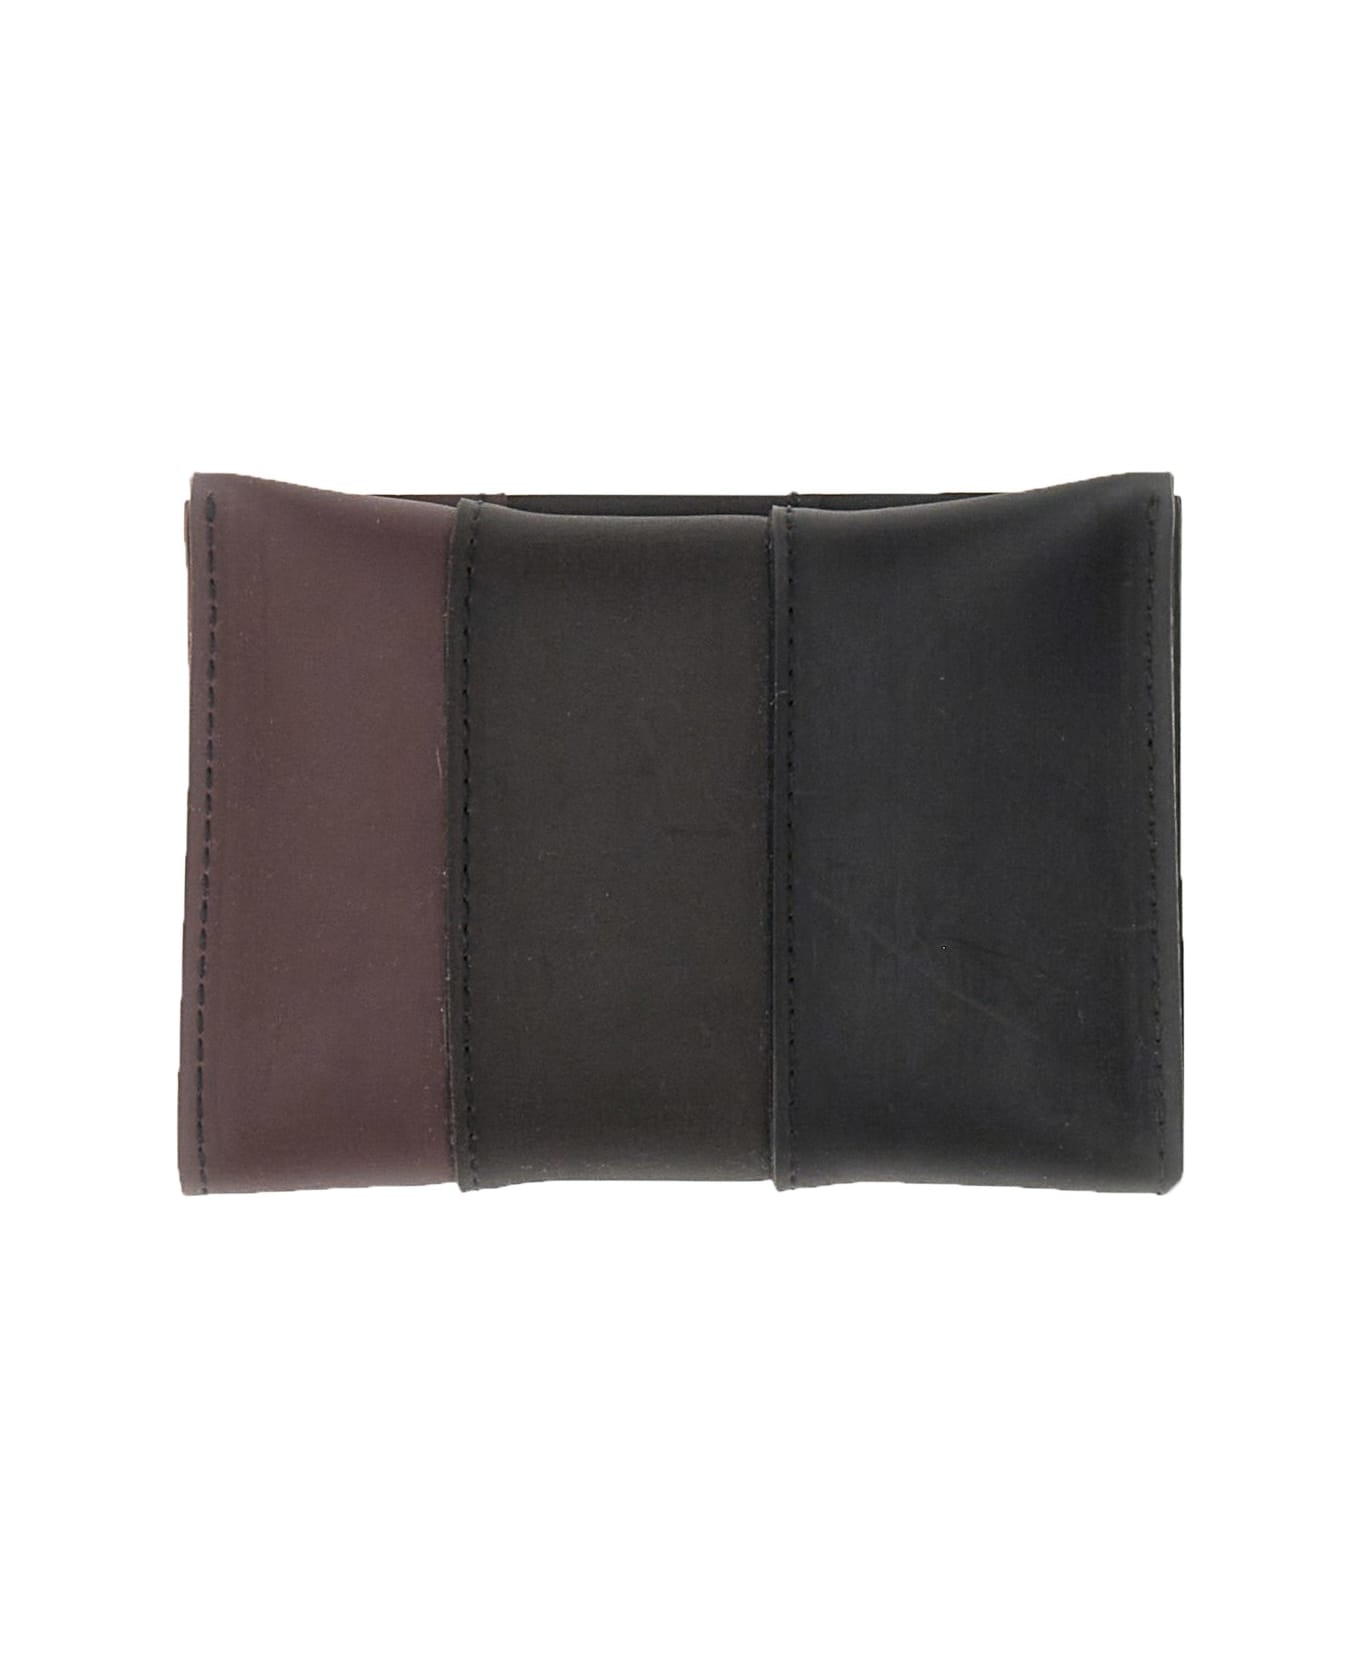 Sunnei Parallelepiped Pudding Wallet - NERO